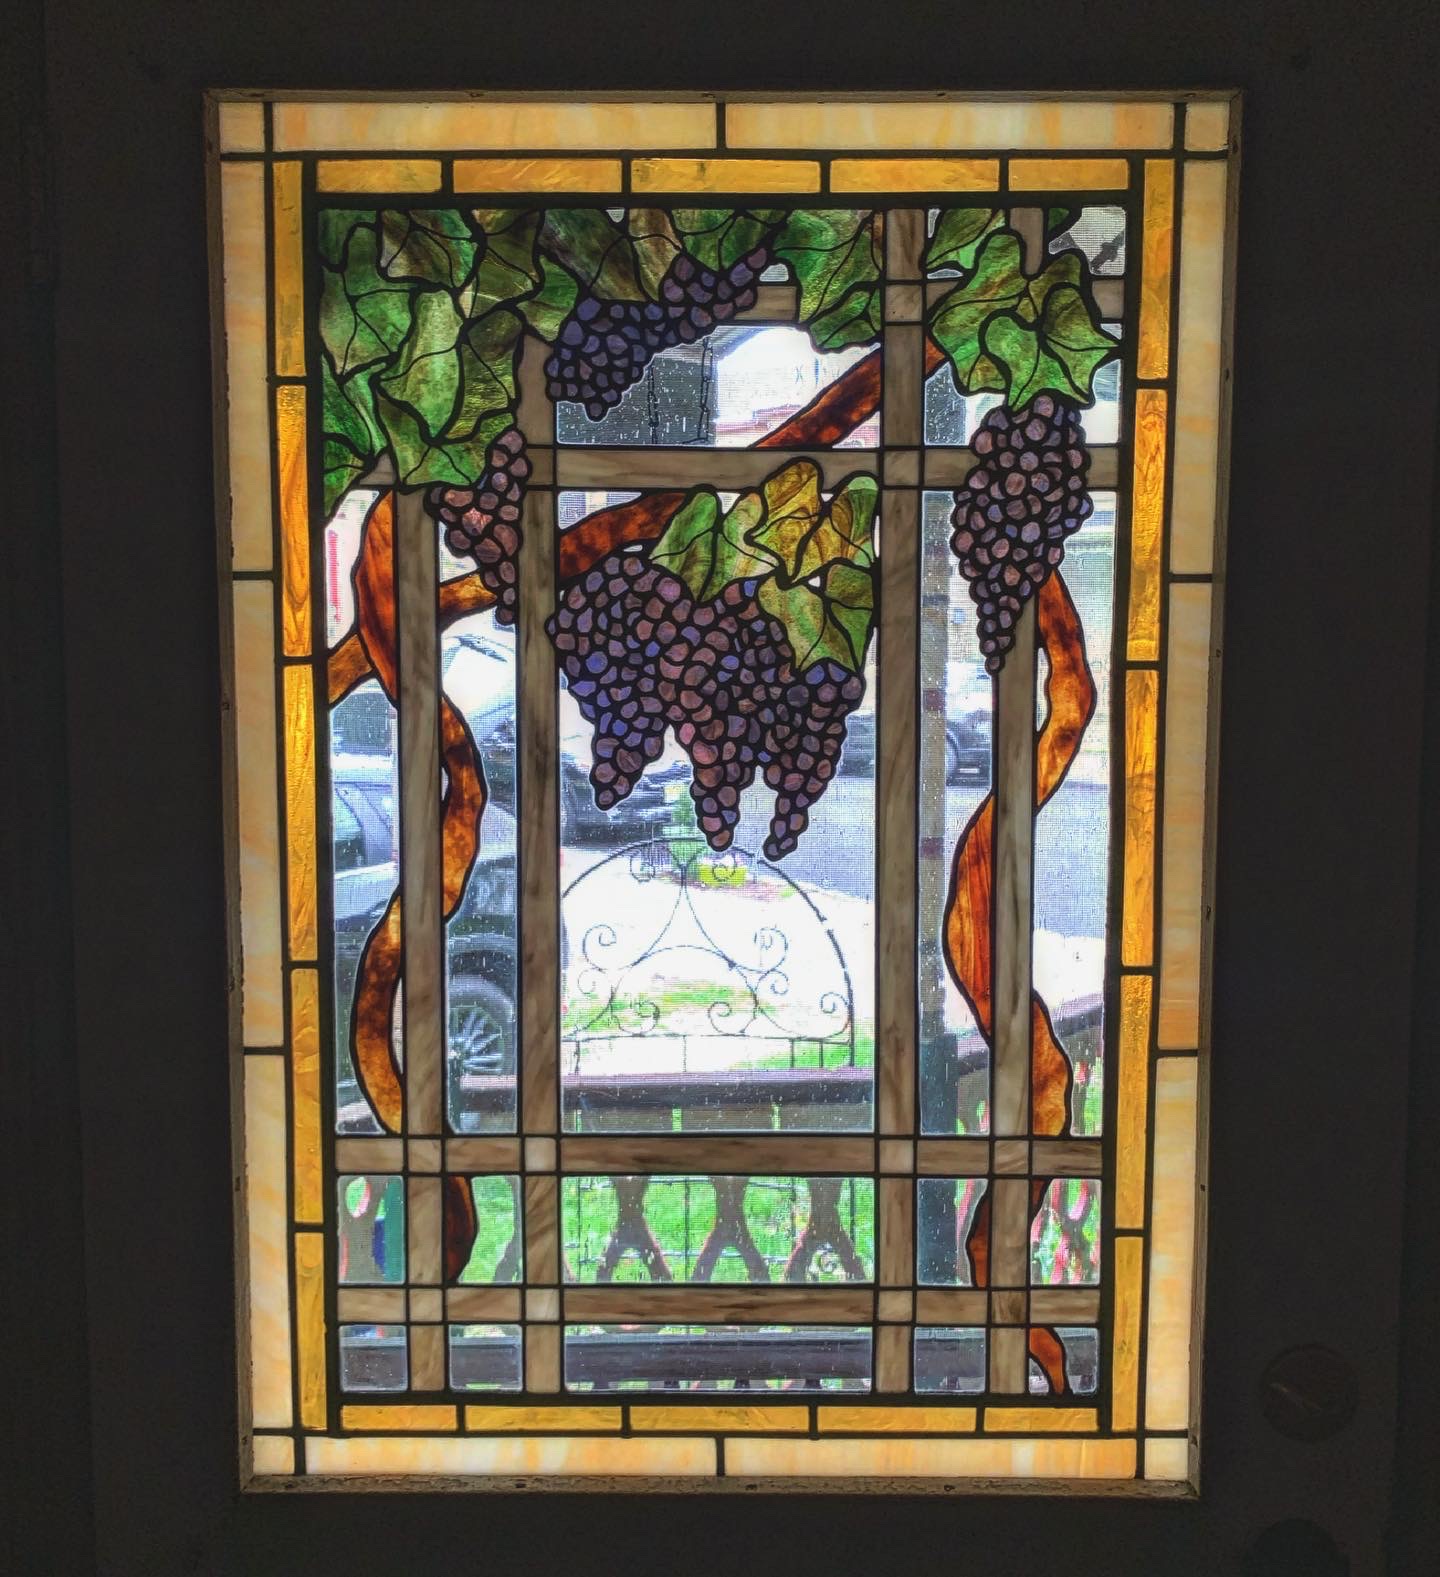 Eastlake Stained Glass Studio & Gallery